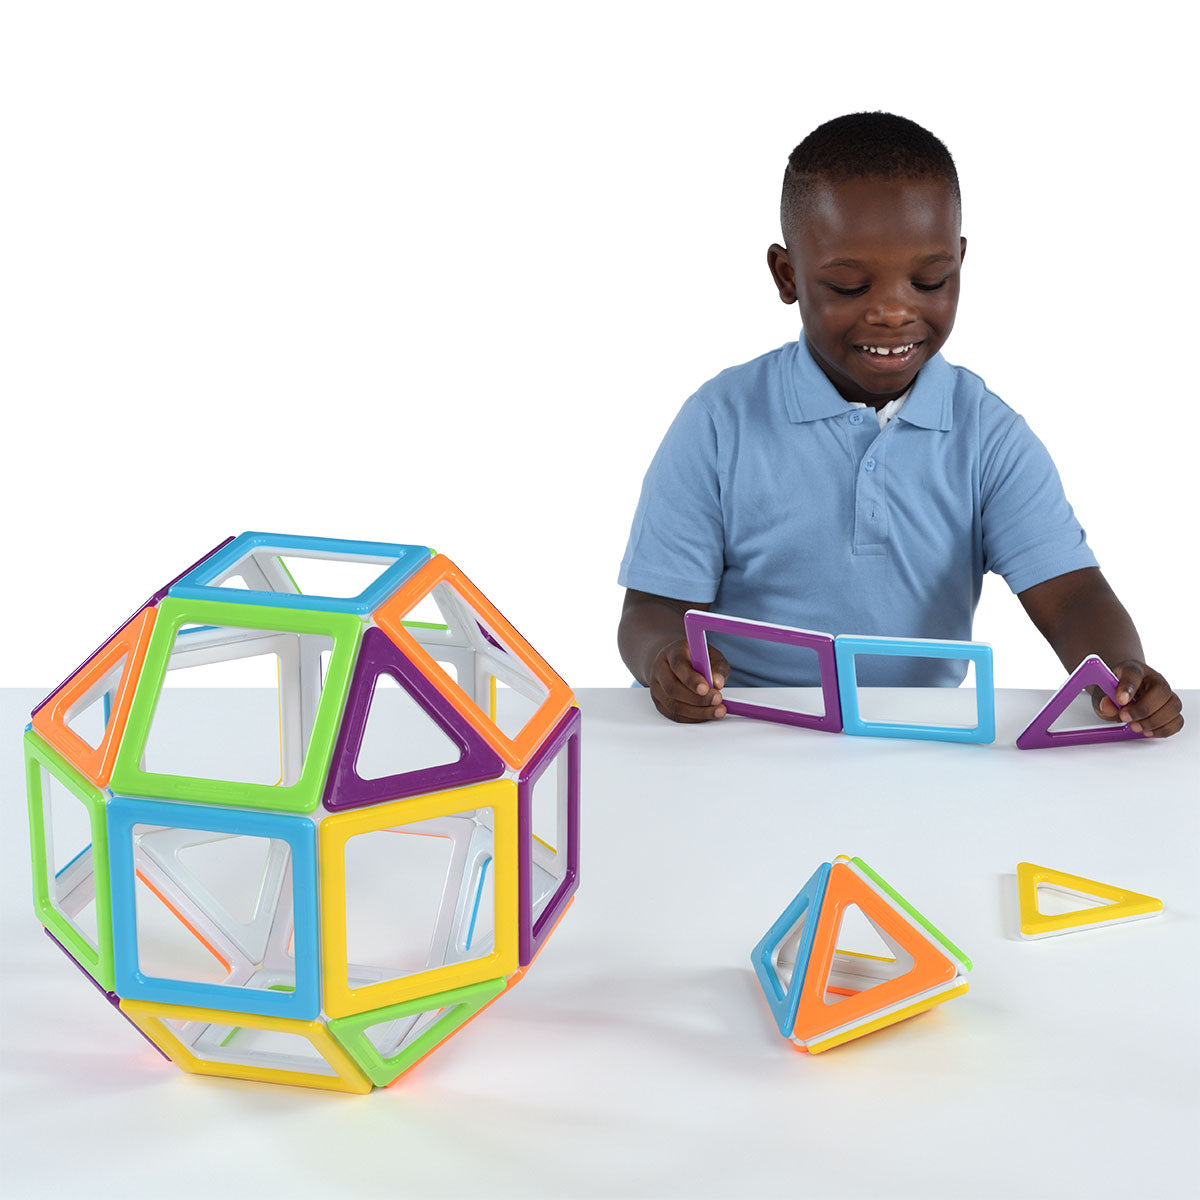 Mega Mag Polydron Set, Unlock the world of geometry and shape exploration with the Mega Mag Polydron Set. Perfect for small groups or individual students, this set is designed to create both 2D and 3D shapes using magnetic pieces - allowing for a hands-on learning experience.The 36-piece set includes 20 squares and 16 triangles, providing enough pieces to build a variety of shapes and structures. With these magnetic pieces, students are encouraged to explore geometry and identify the properties of 2D and 3D